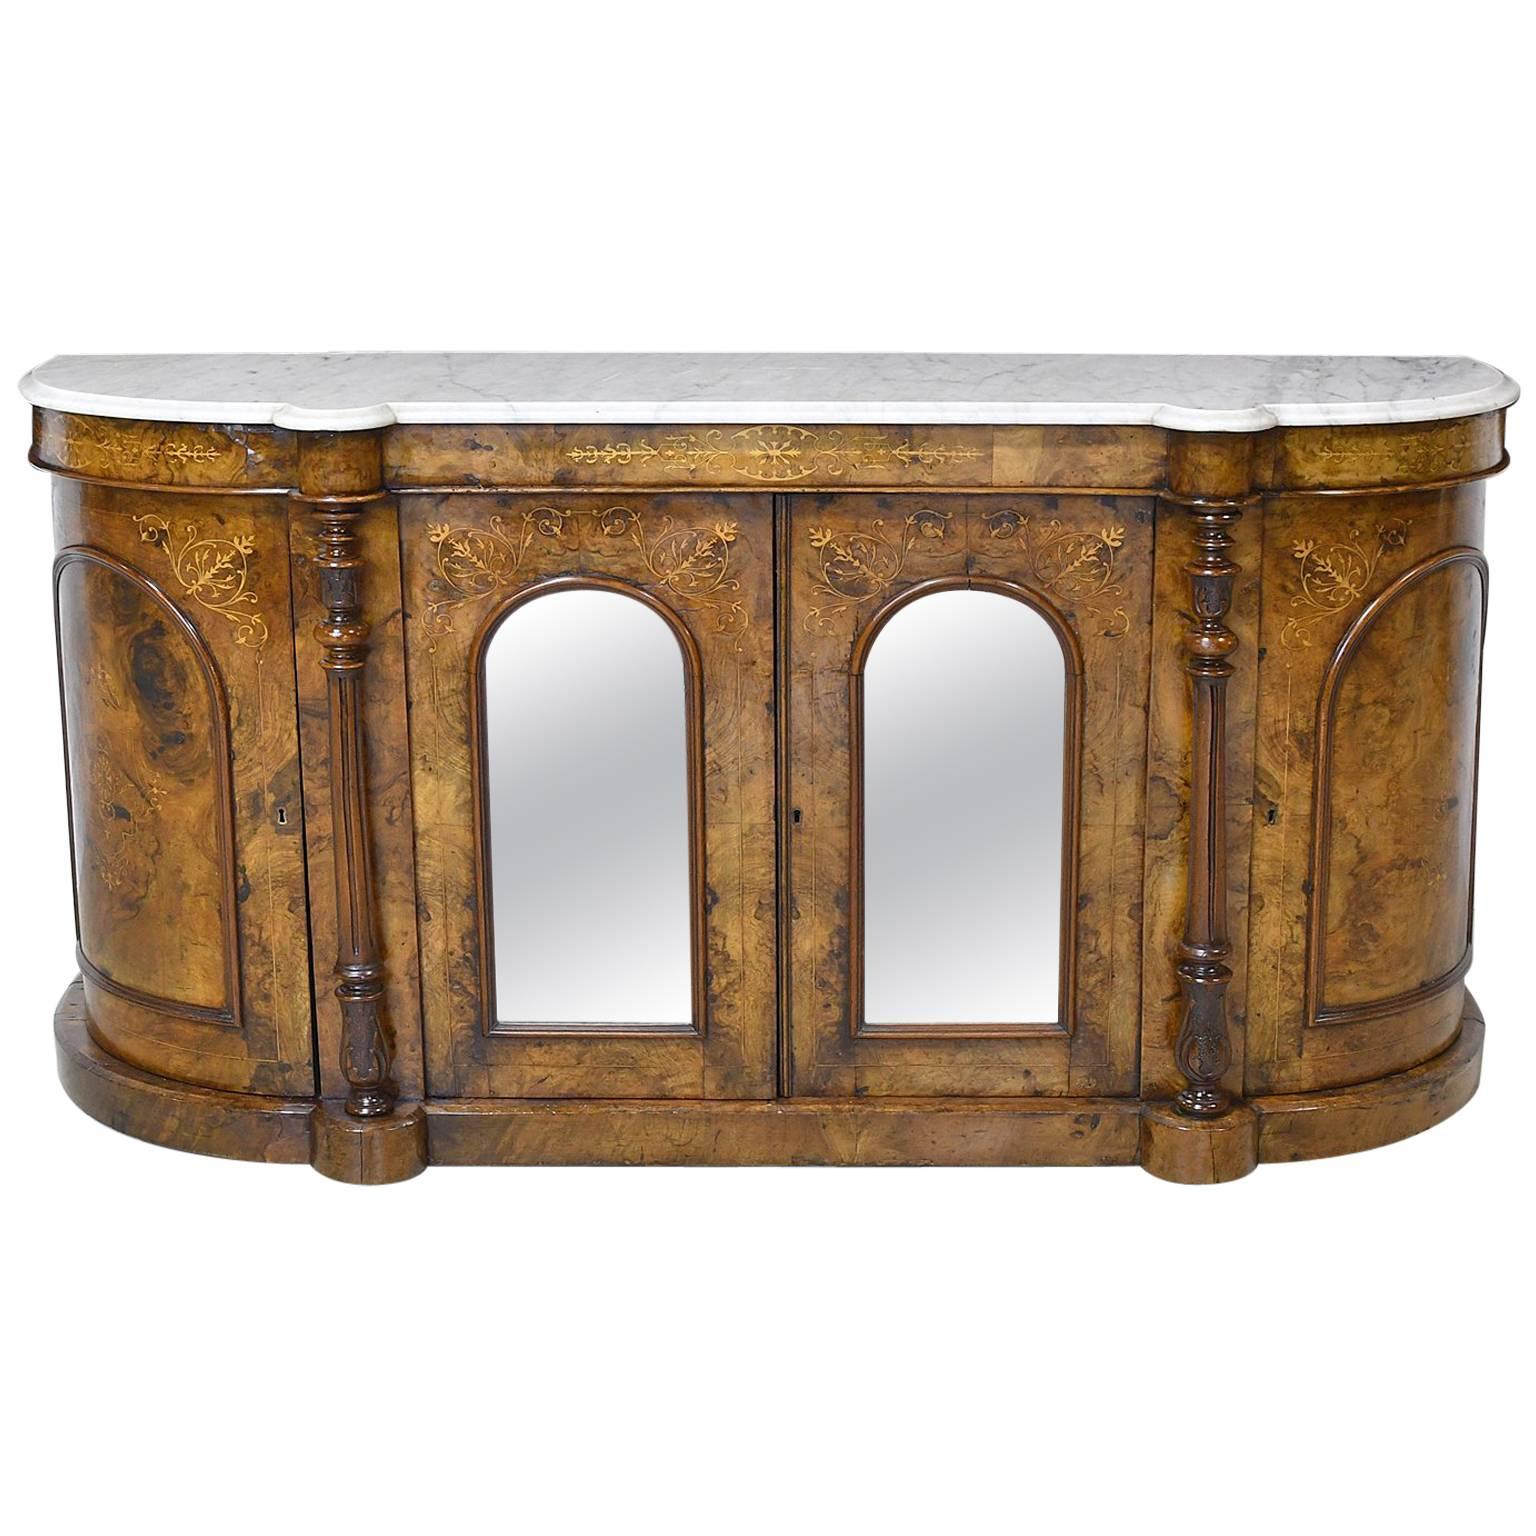 19th Century English Sideboard in Burl Walnut with Marquetry withMarble Top